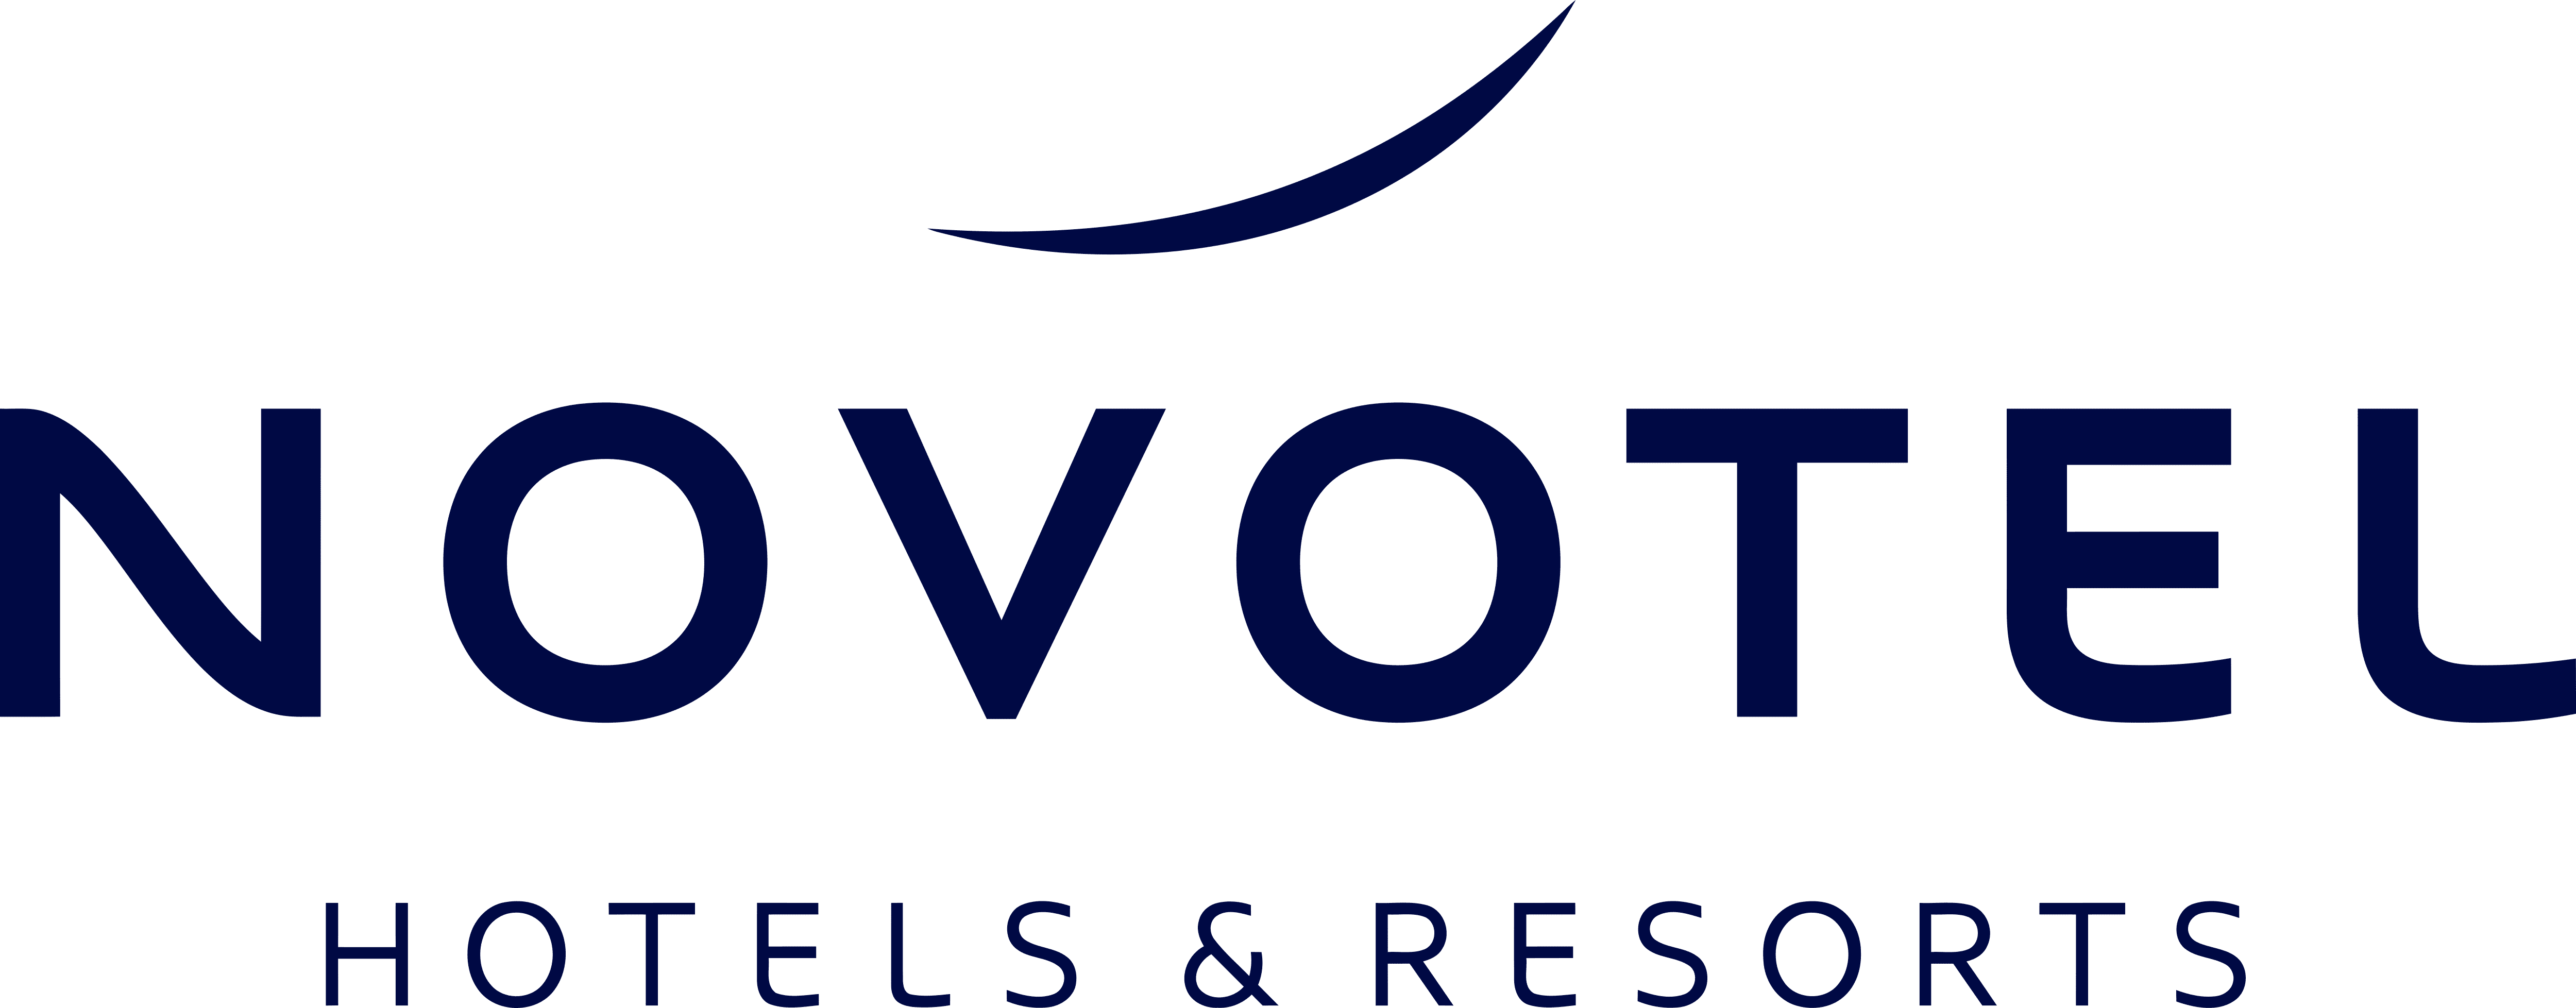 Novotel Hotels Culture | Comparably